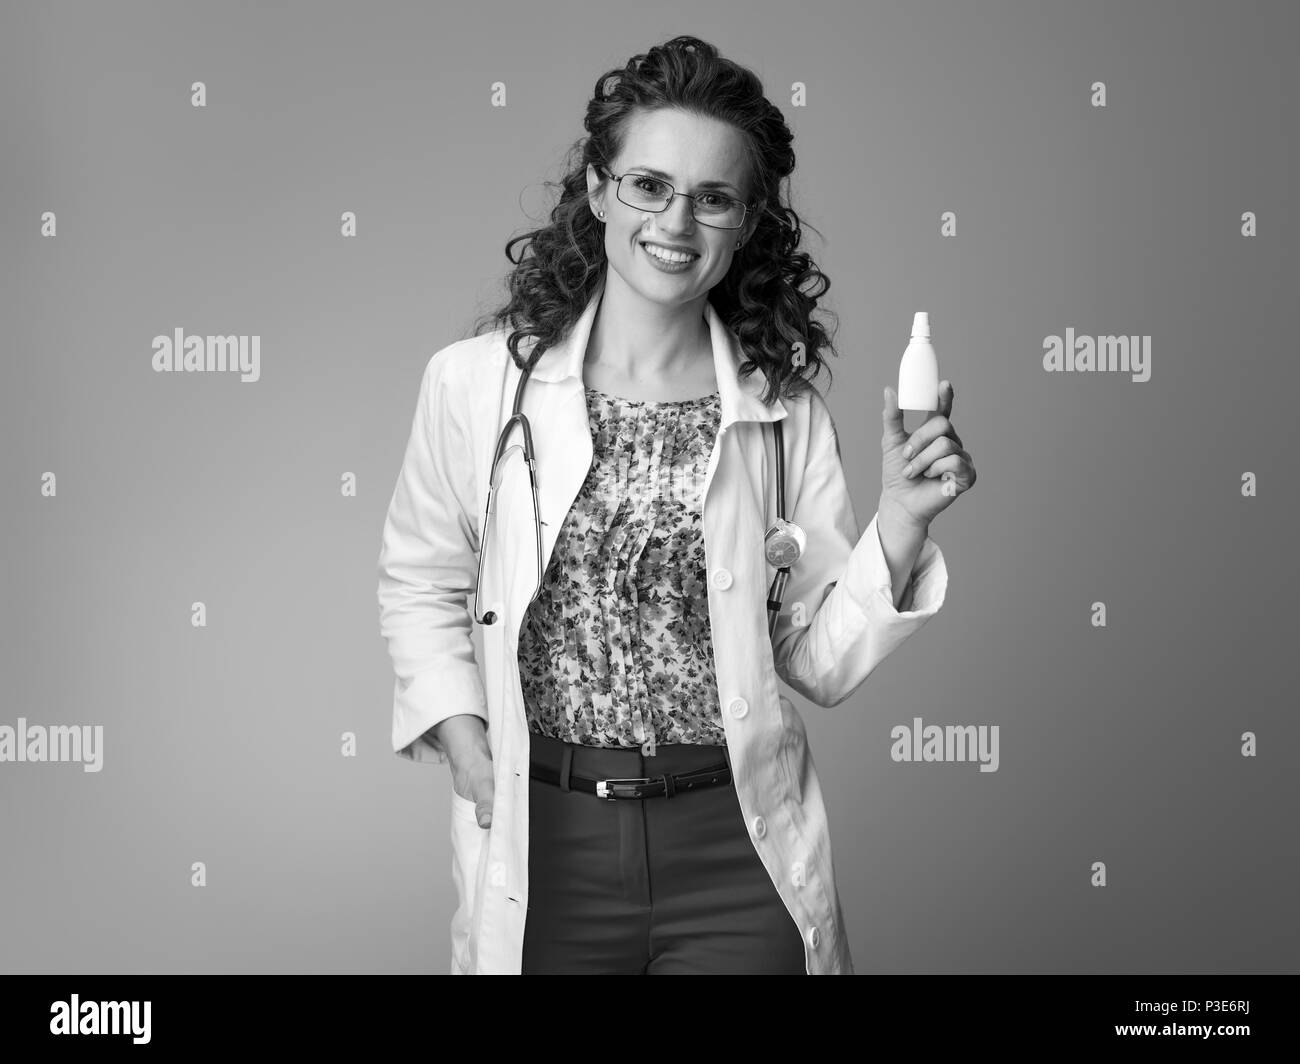 smiling pediatrist woman in white medical robe showing nasal drops isolated on background Stock Photo